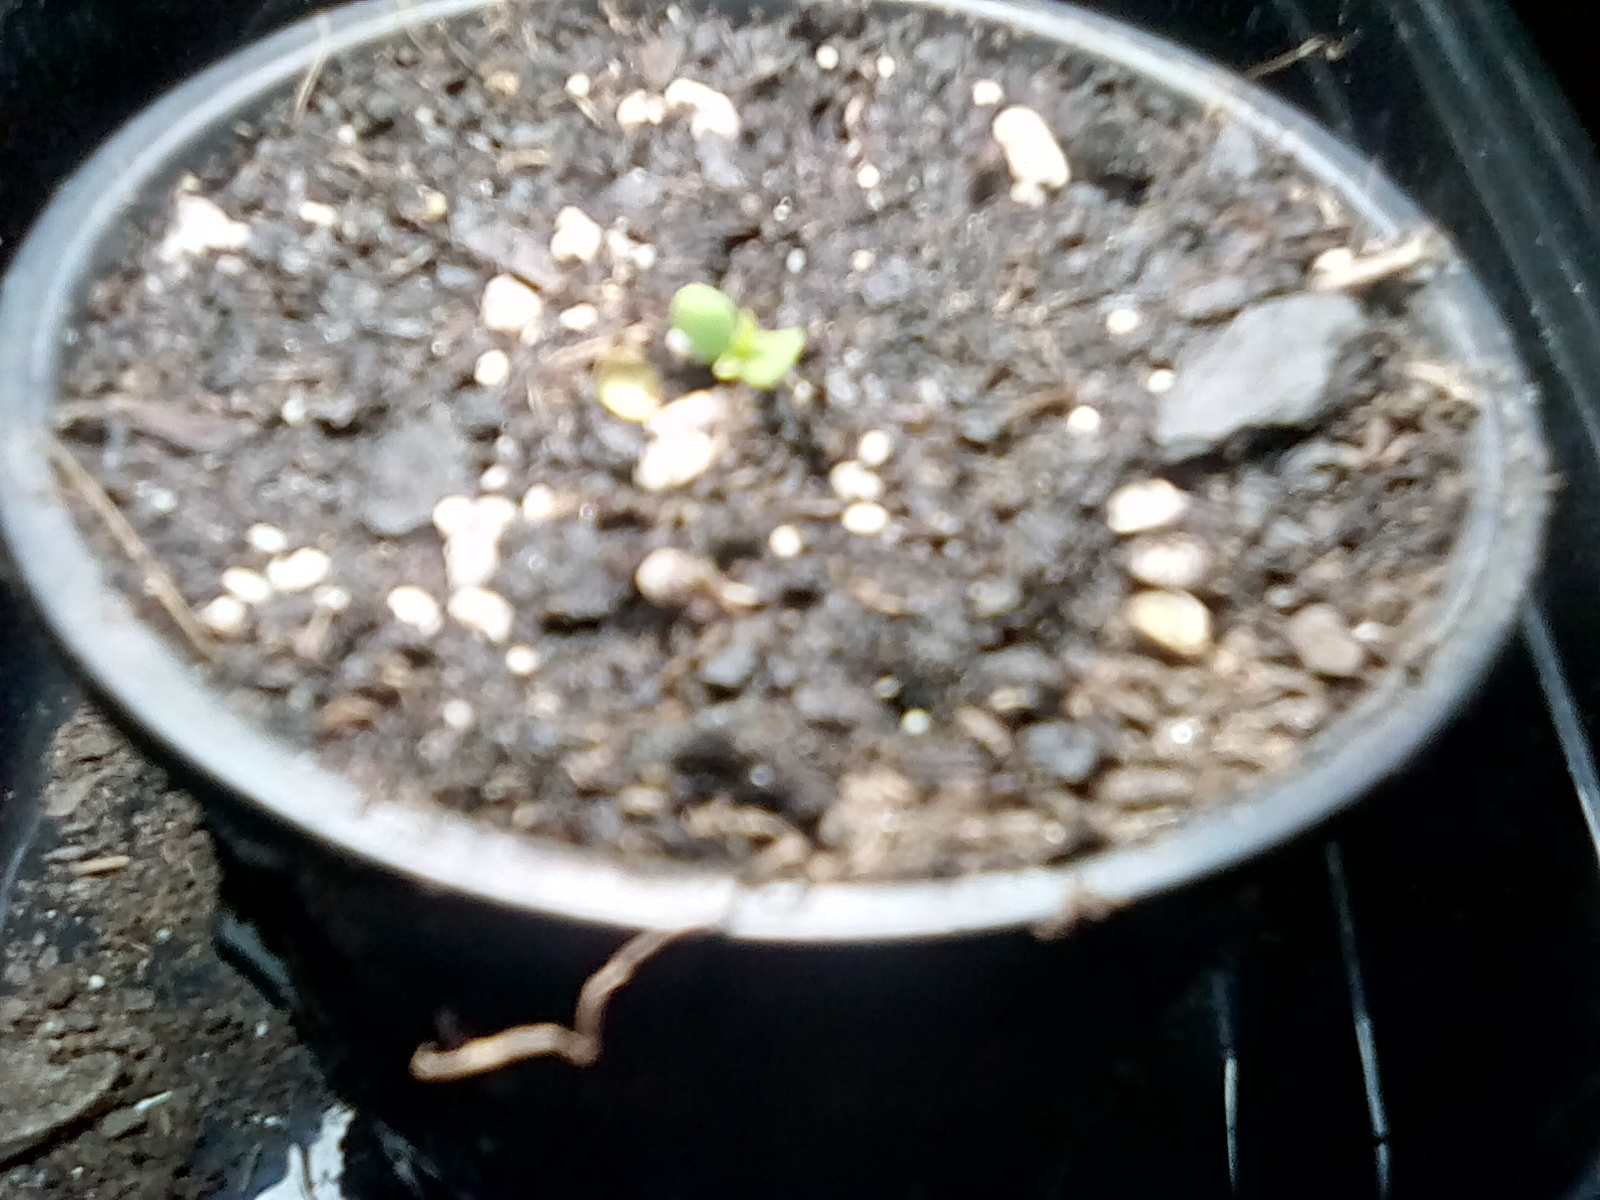 First true leaves at 6 hours from emerging..jpg